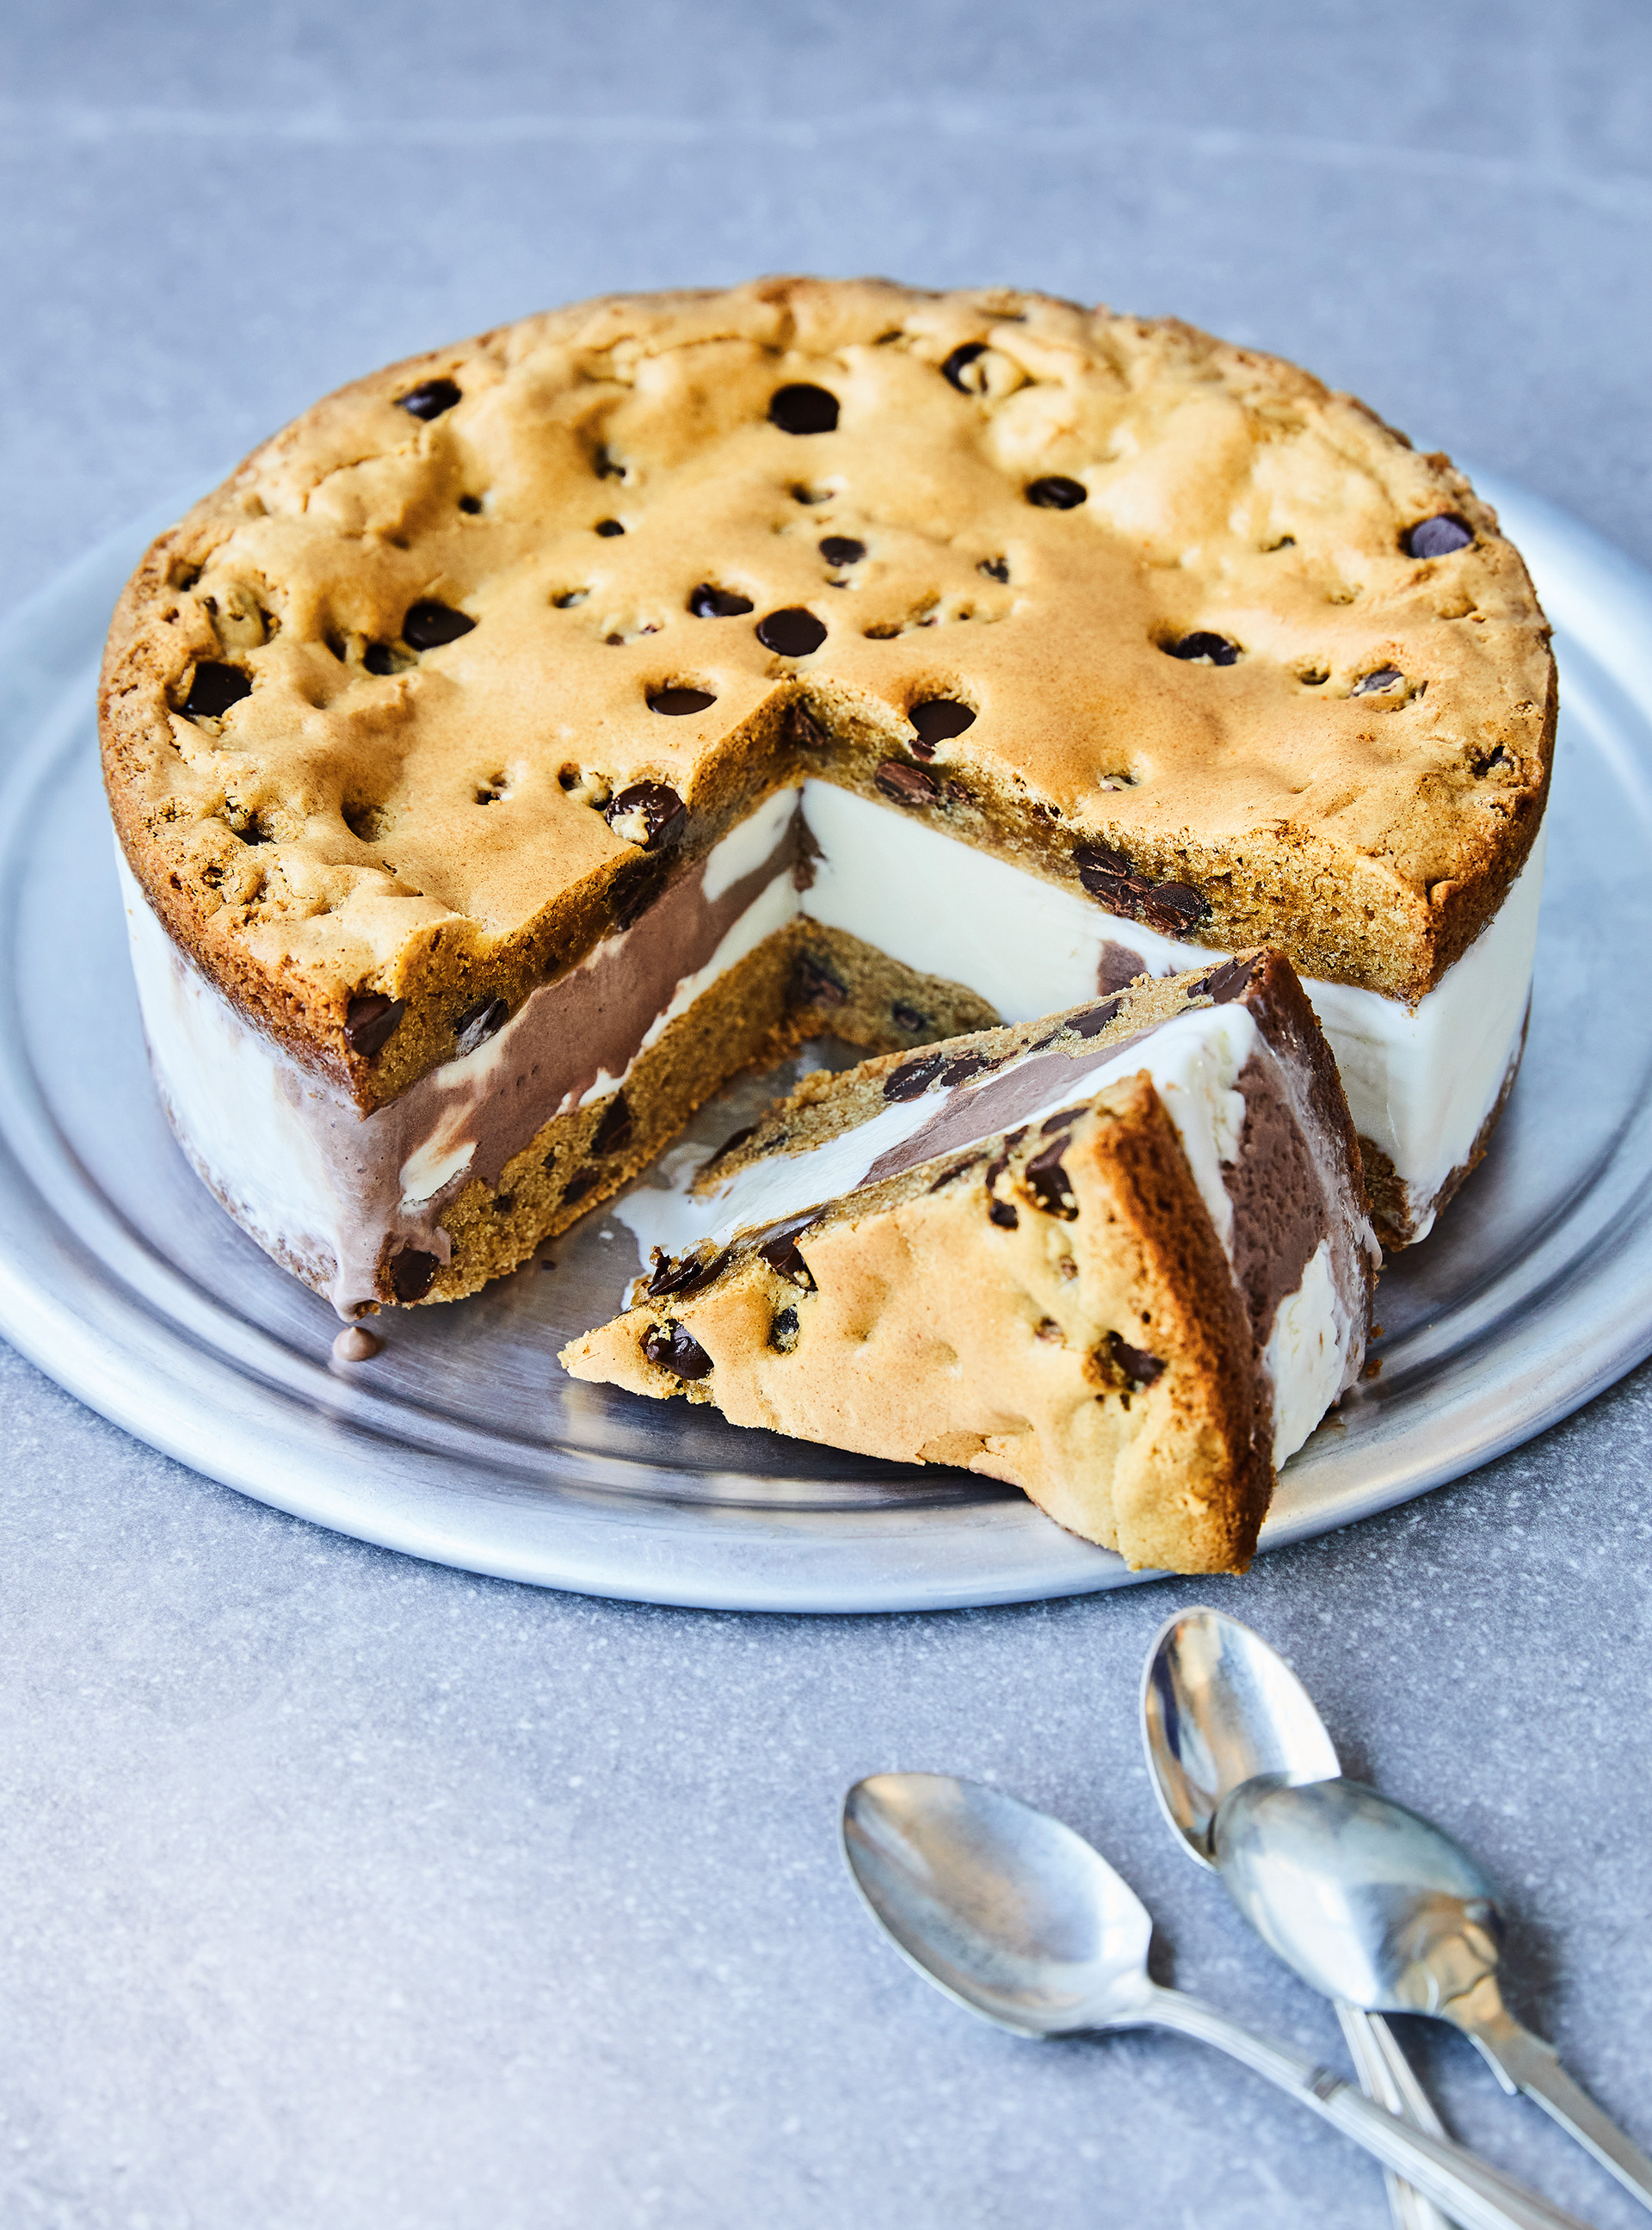 Giant Ice Cream Sandwich with Chocolate Chips